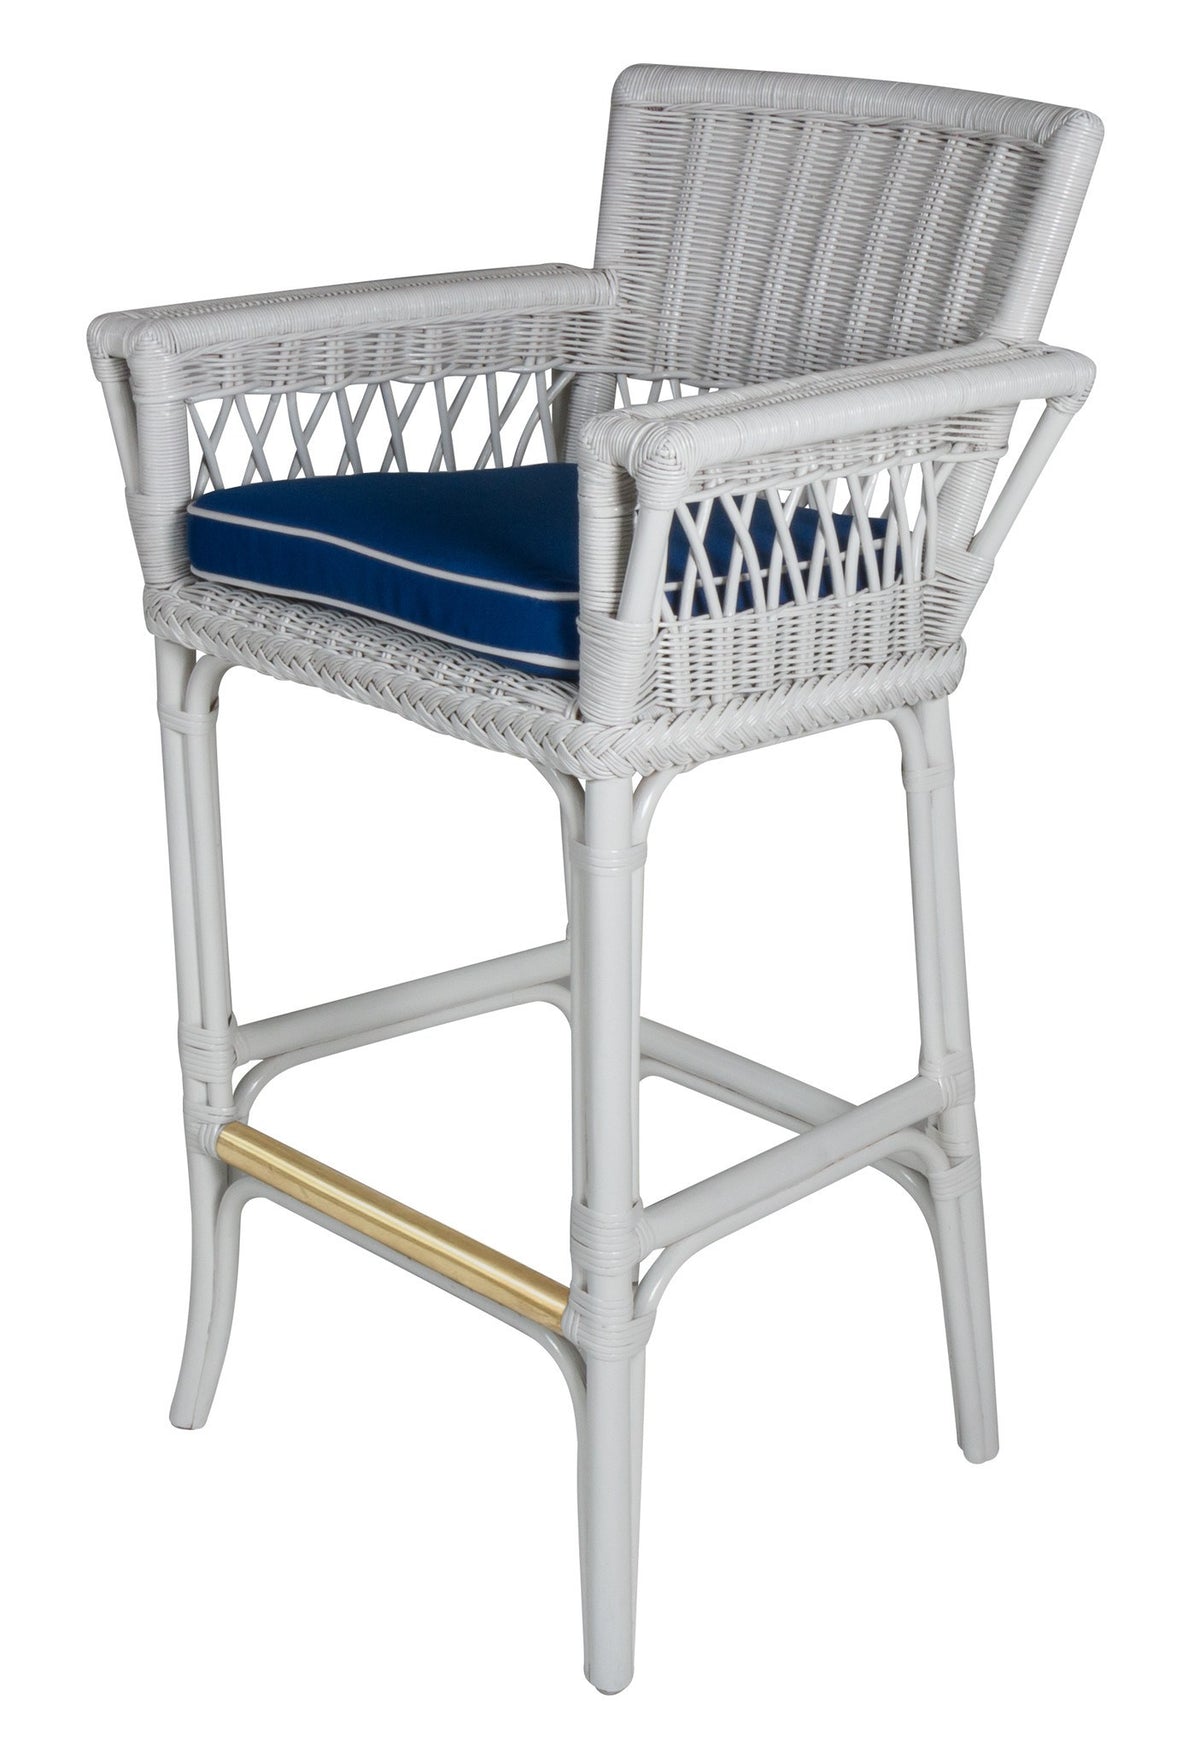 Designer Wicker &amp; Rattan By Tribor Windsor Barstool With Arm by Design Wicker from Tribor Bar Stool - Rattan Imports